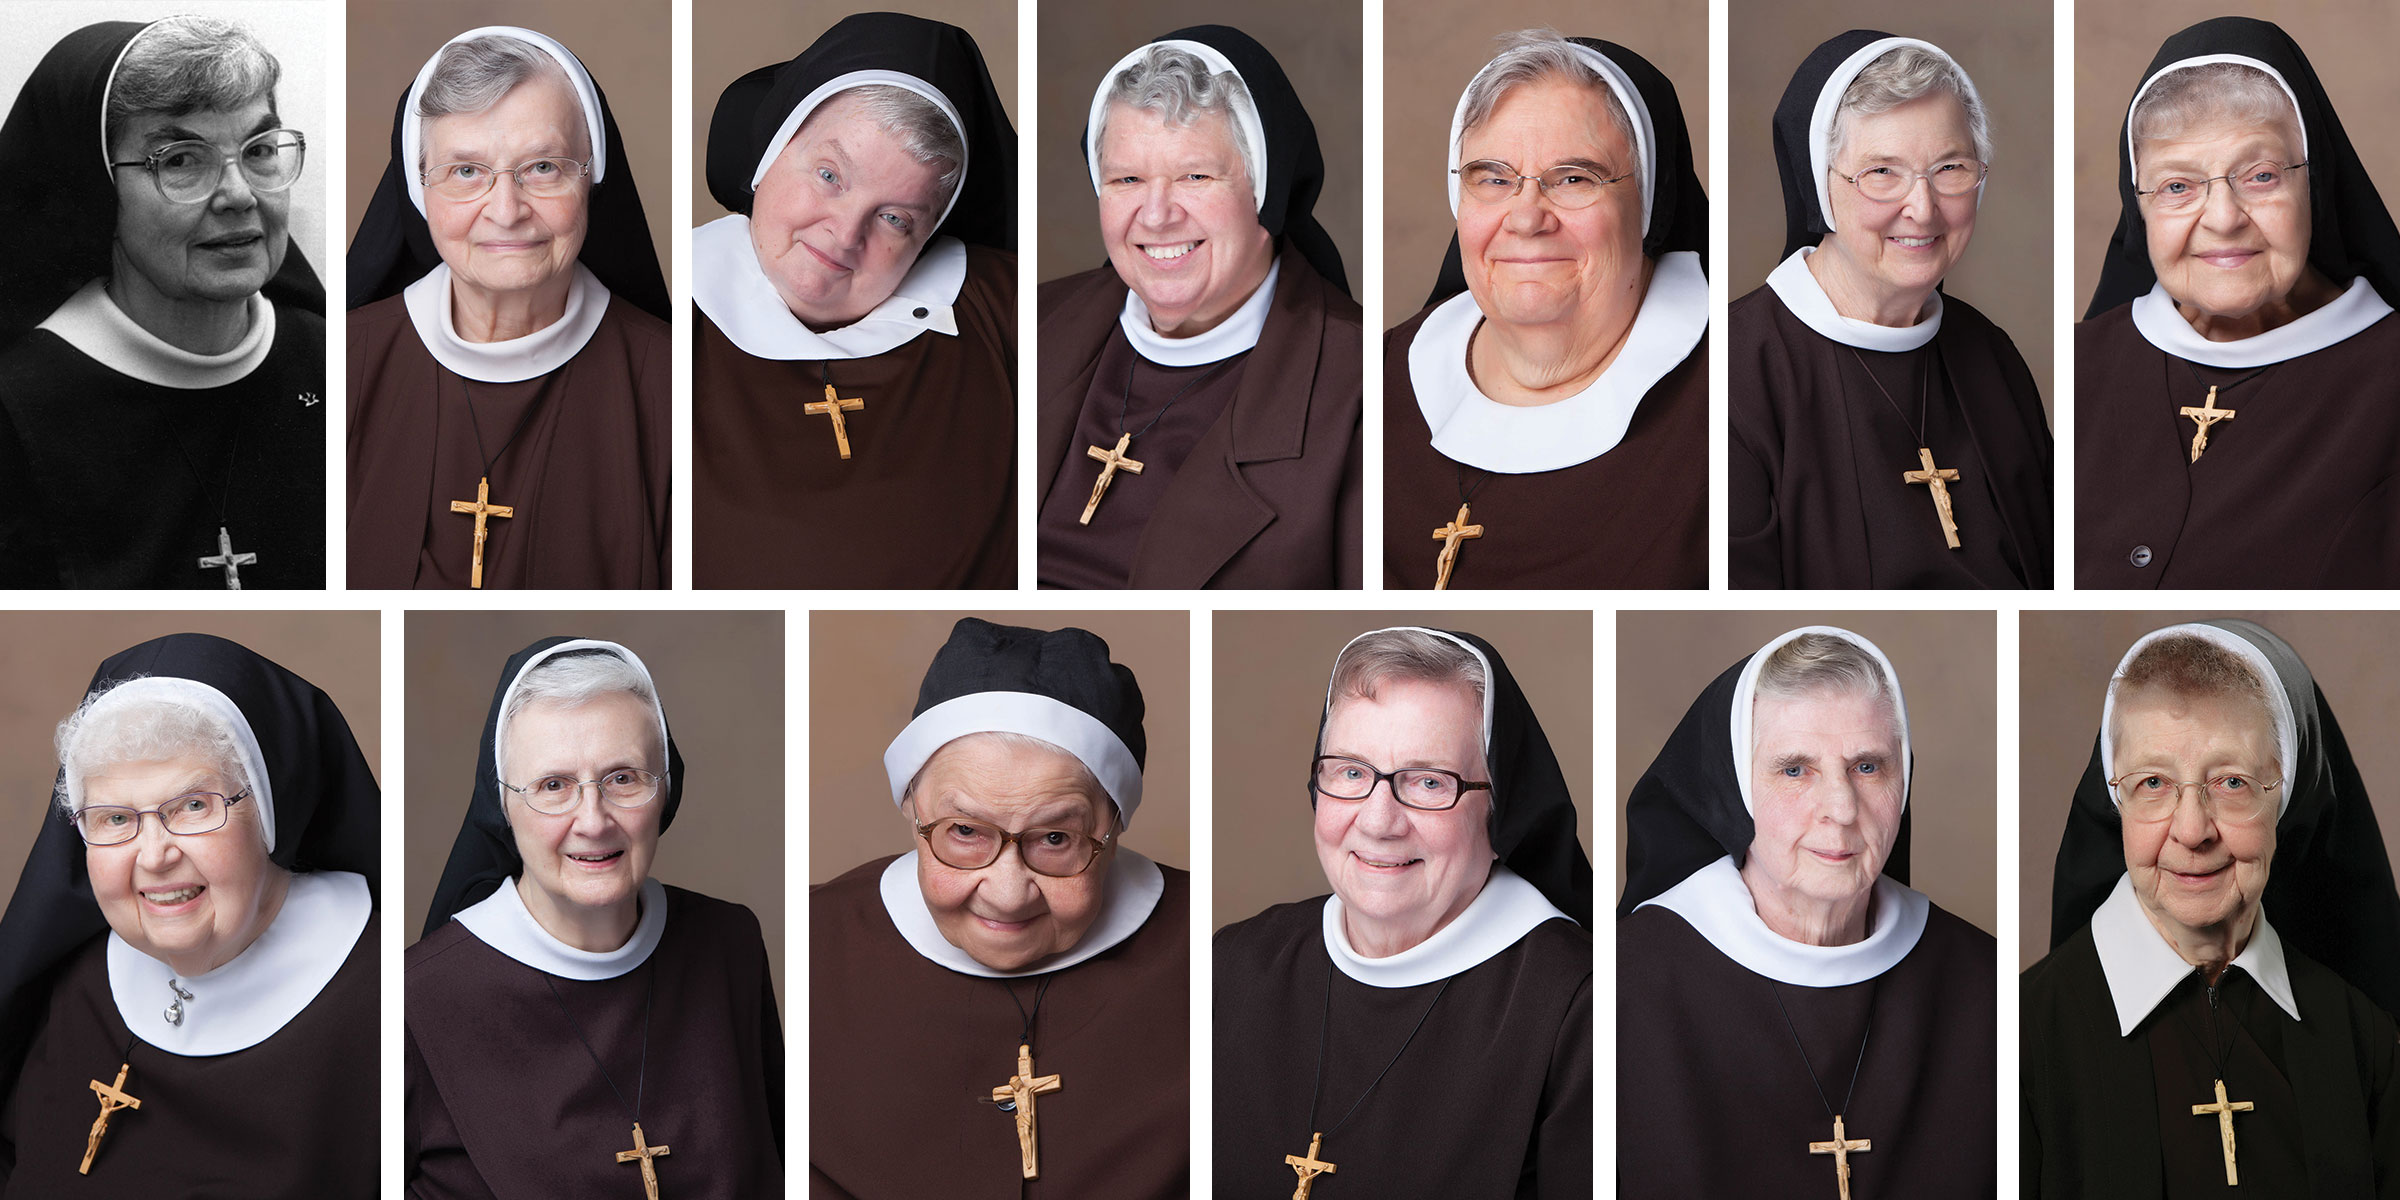 13 nuns from the Felician Sisters of North America who have passed away from COVID-19